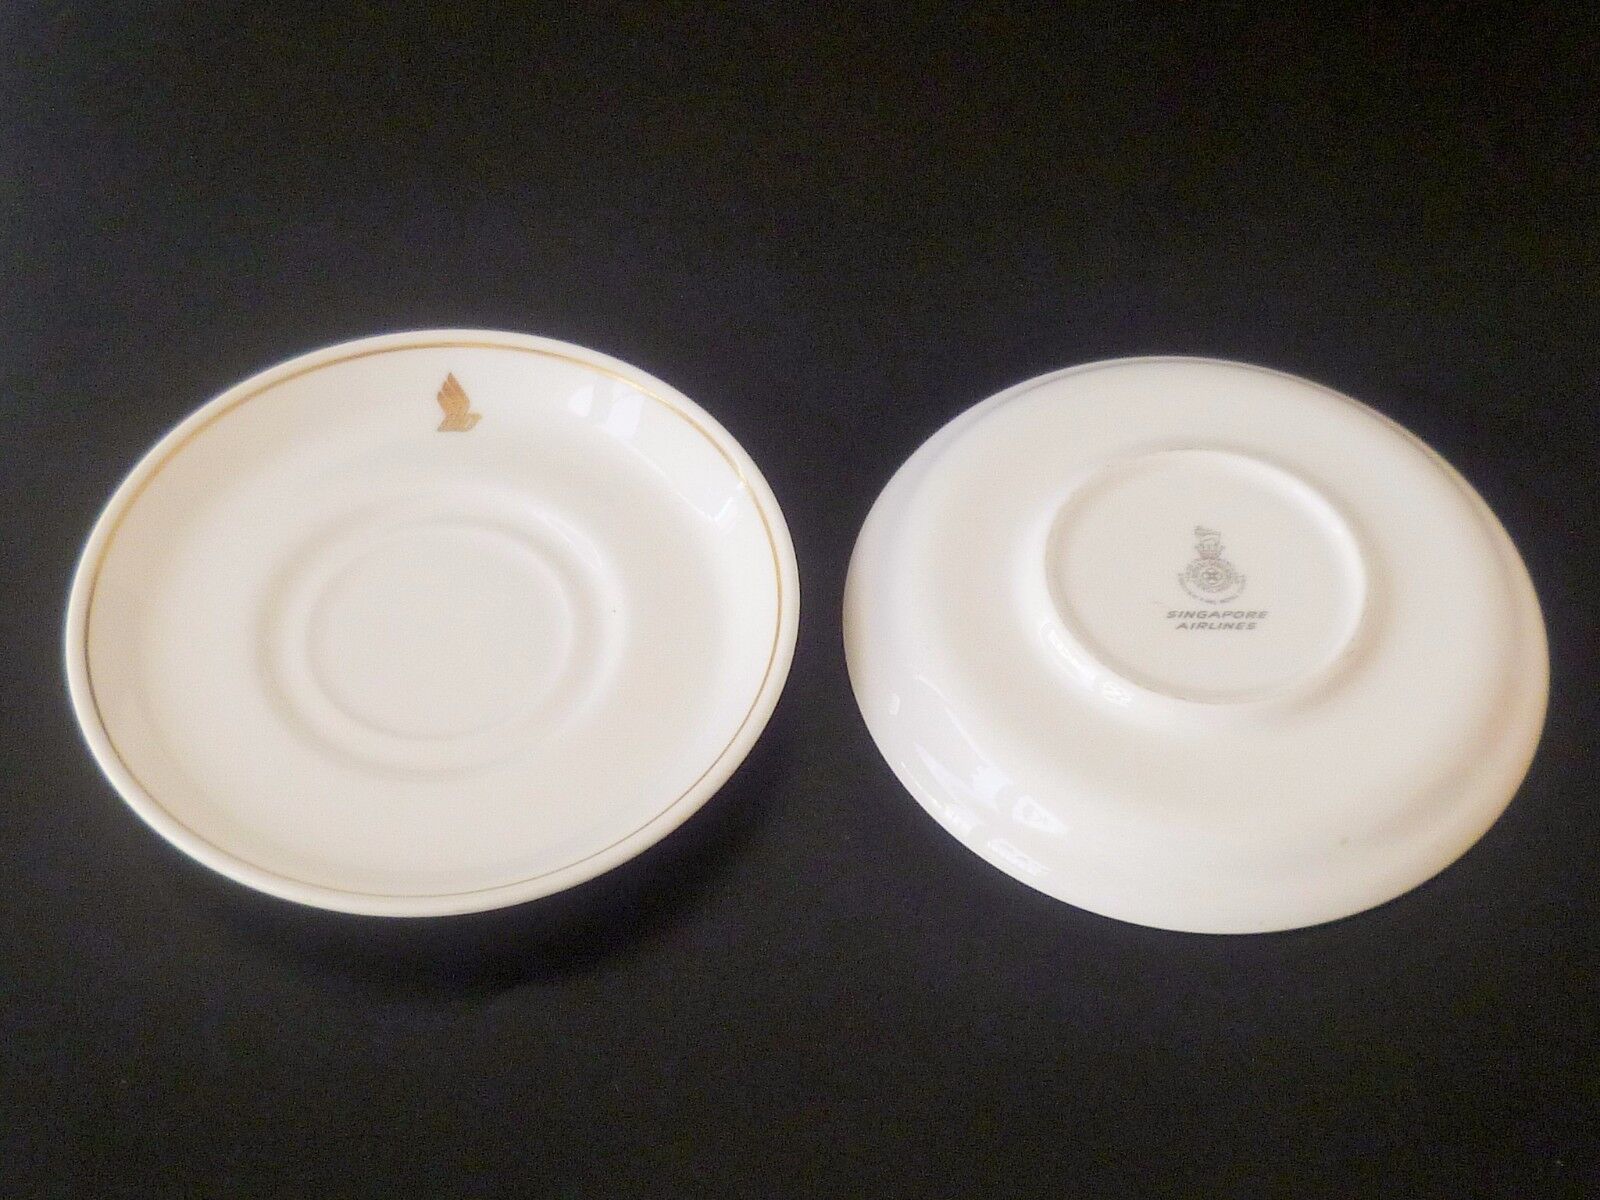 RARE  1 pc. of  Made in England - Singapore Airlines classic plate saucer 